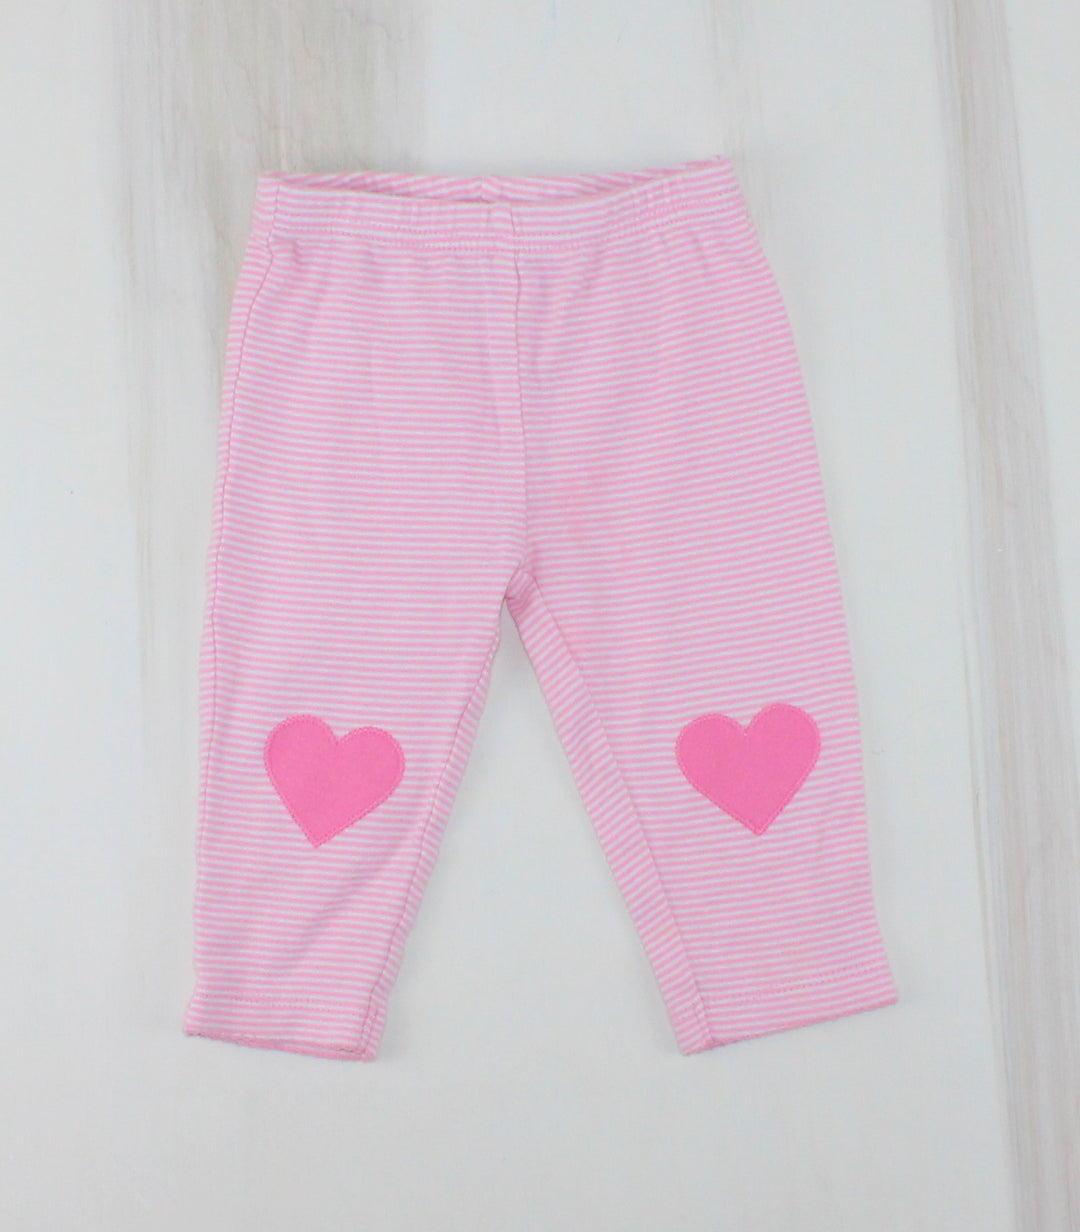 CARTERS PINK STRIPES WITH HEART KNEE LEGGINGS 3-6M EUC